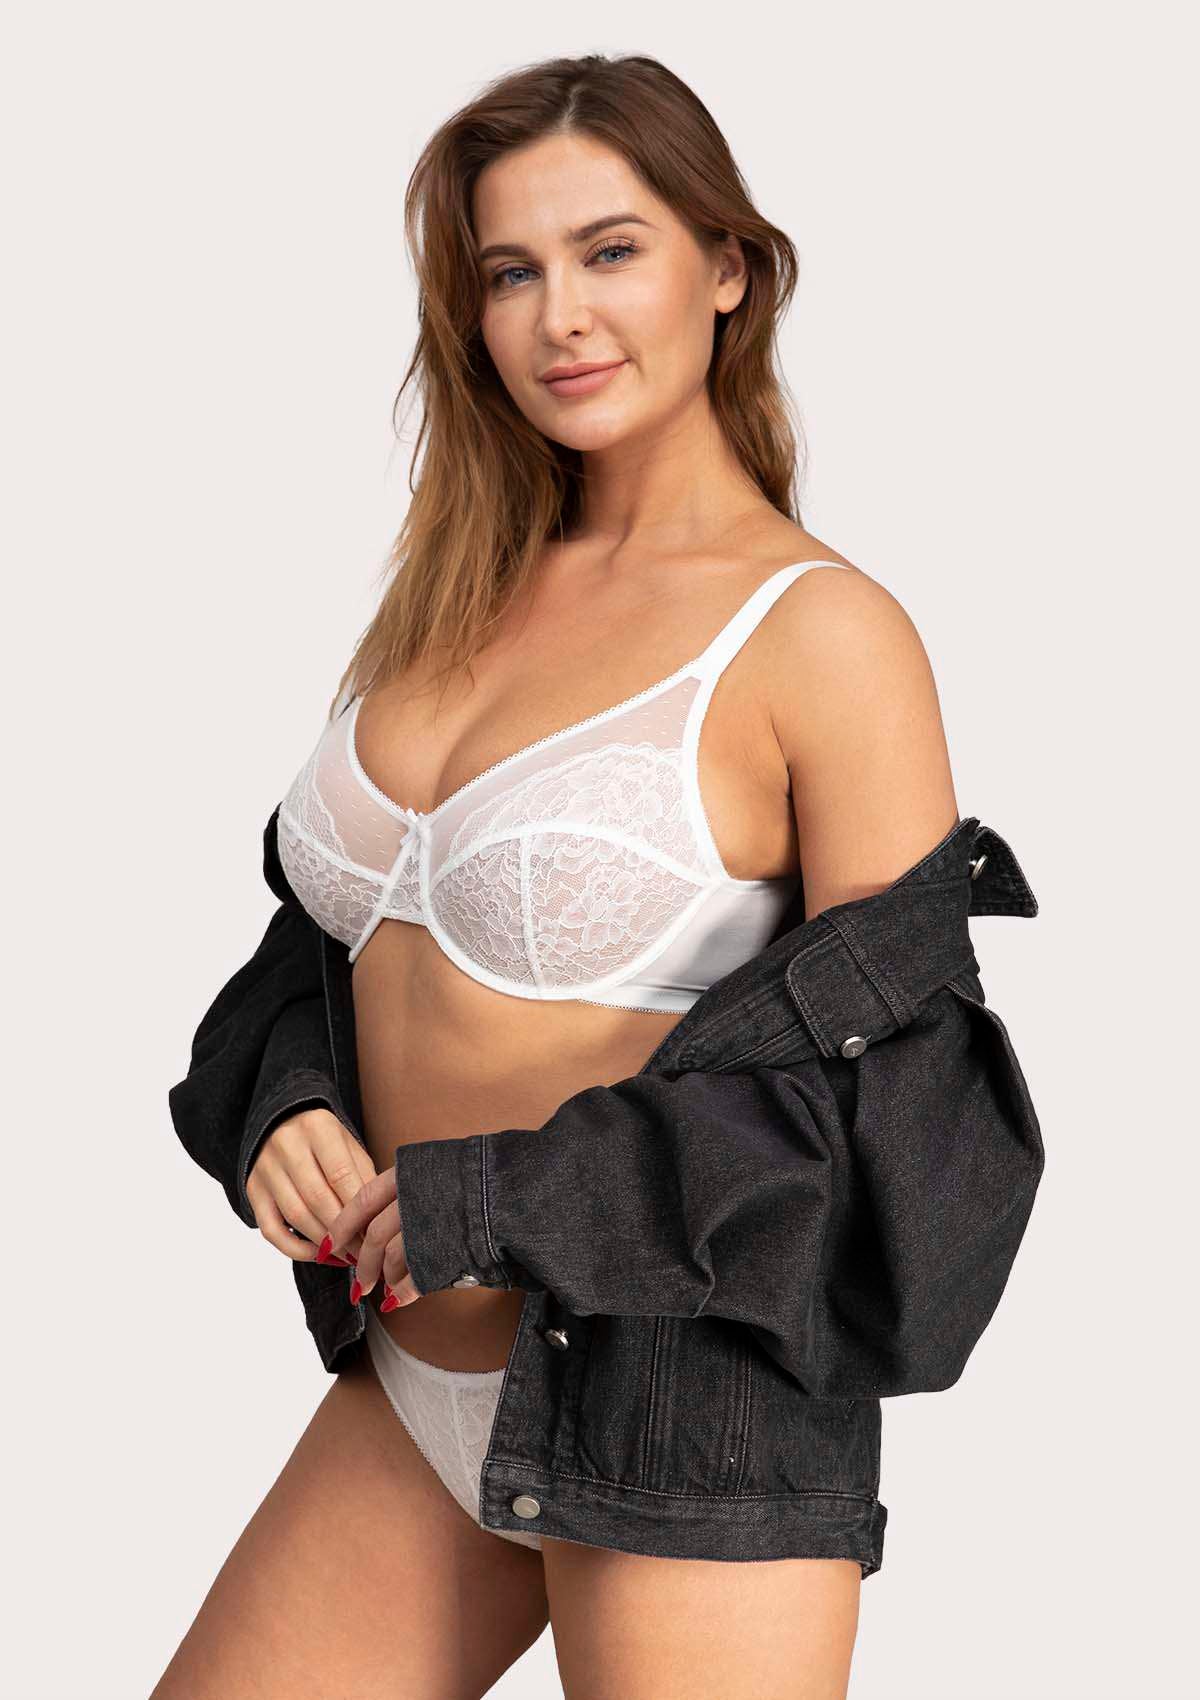 HSIA Enchante Lace Bra And Panties Set: Bra For Side And Back Fat - White / 40 / DDD/F